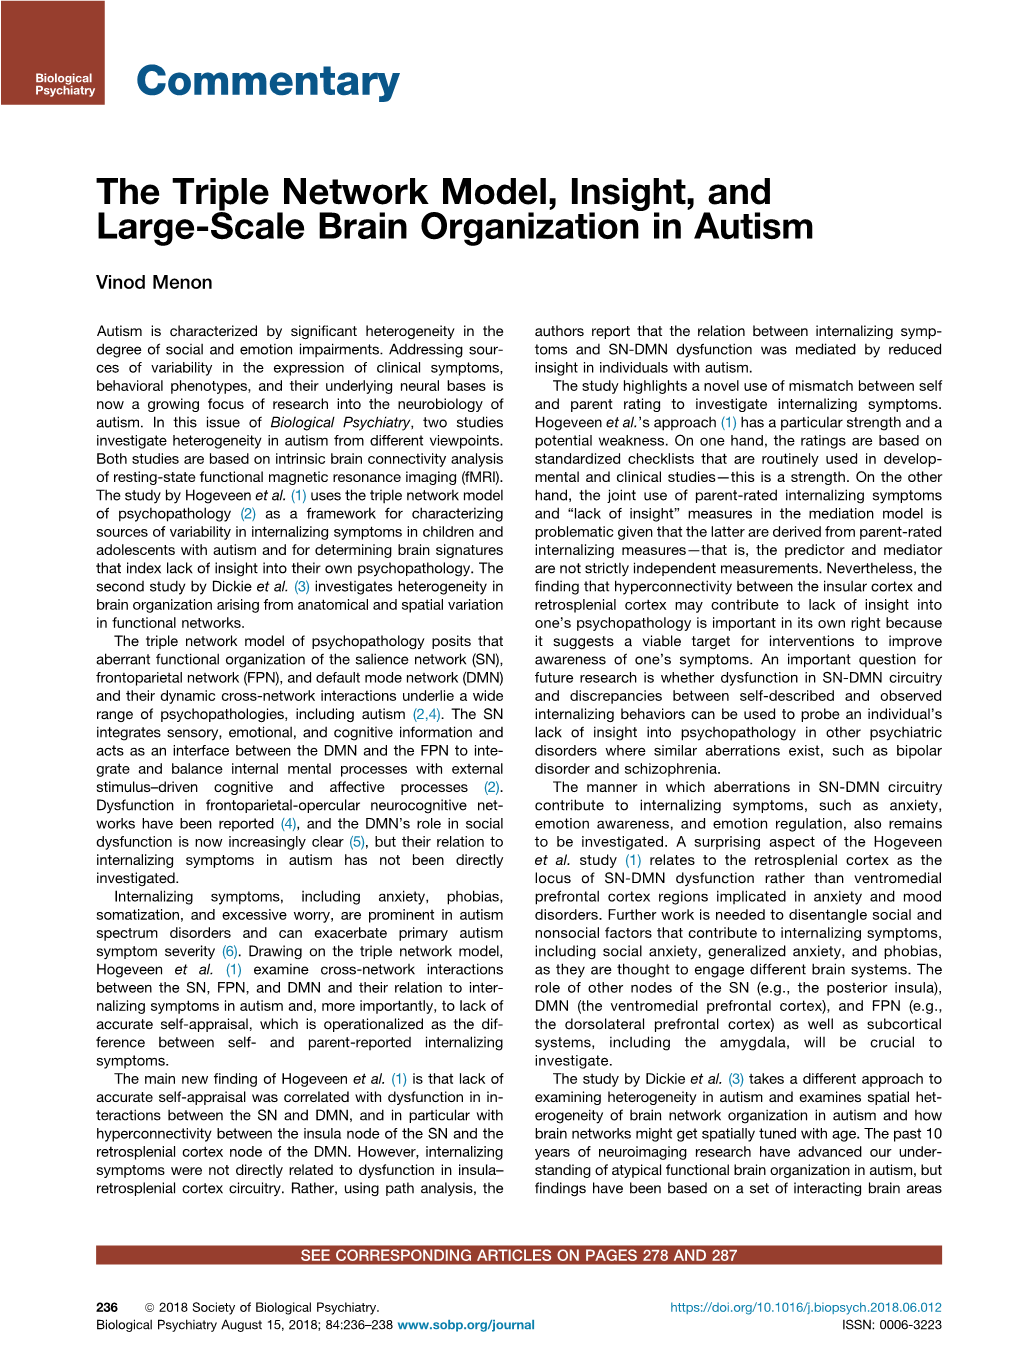 The Triple Network Model, Insight, and Large-Scale Brain Organization in Autism